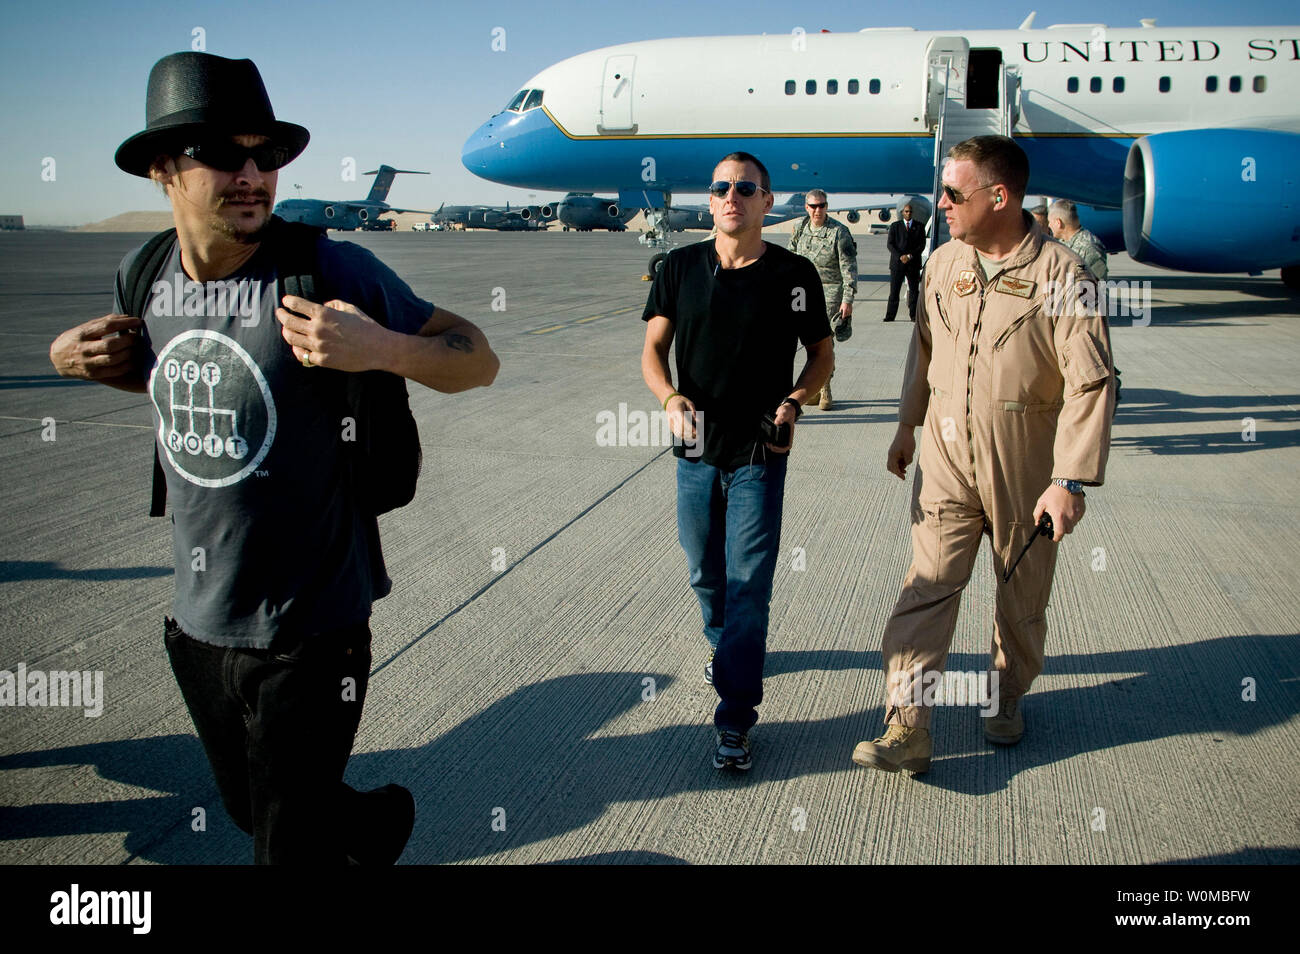 Award winning musician Kid Rock (L) and Tour de France champion Lance Armstrong (C) arrive at Al Udeid Air Base, Qatar for the USO holiday tour on December 17, 2007. Along with Rock and Armstrong, tour host Chairman of the Joint Chiefs of Staff, U.S. Navy Adm. Mike Mullen was joined by comedians Lewis Black and Robin Williams and Miss USA Rachel Smith in the 15-stop, 7-country tour thanking the forward deployed troops for their sacrifice and service.  (UPI Photo/Chad J. McNeeley/Department of Defense) Stock Photo